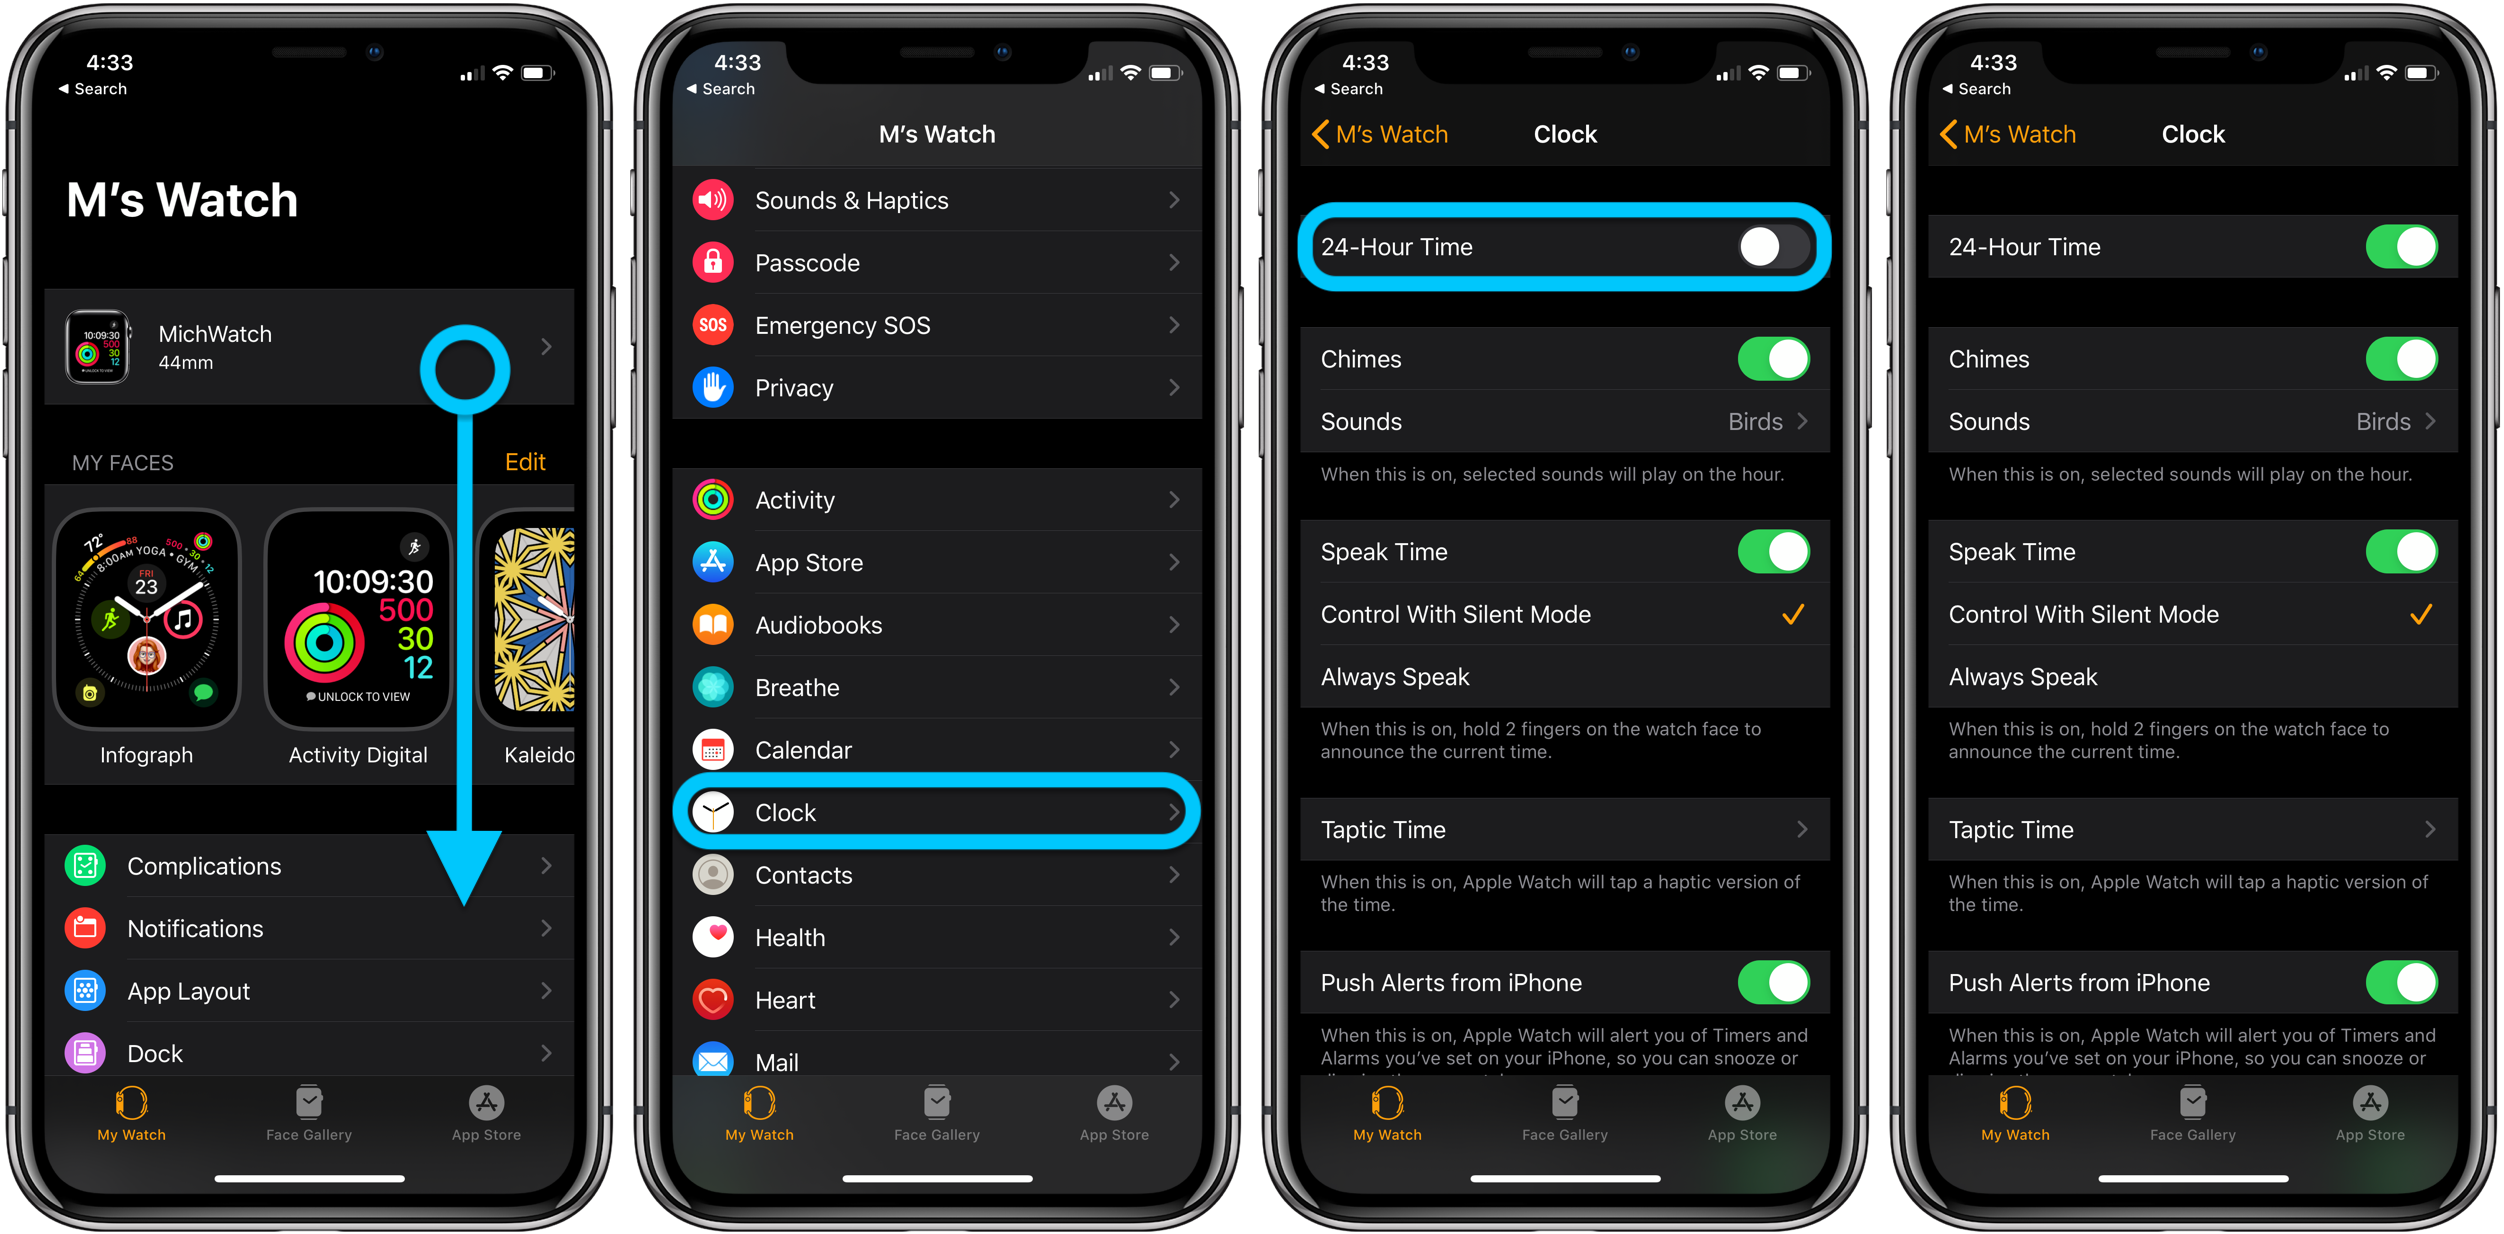 How to set Apple Watch military time 24-hour time walkthrough 1